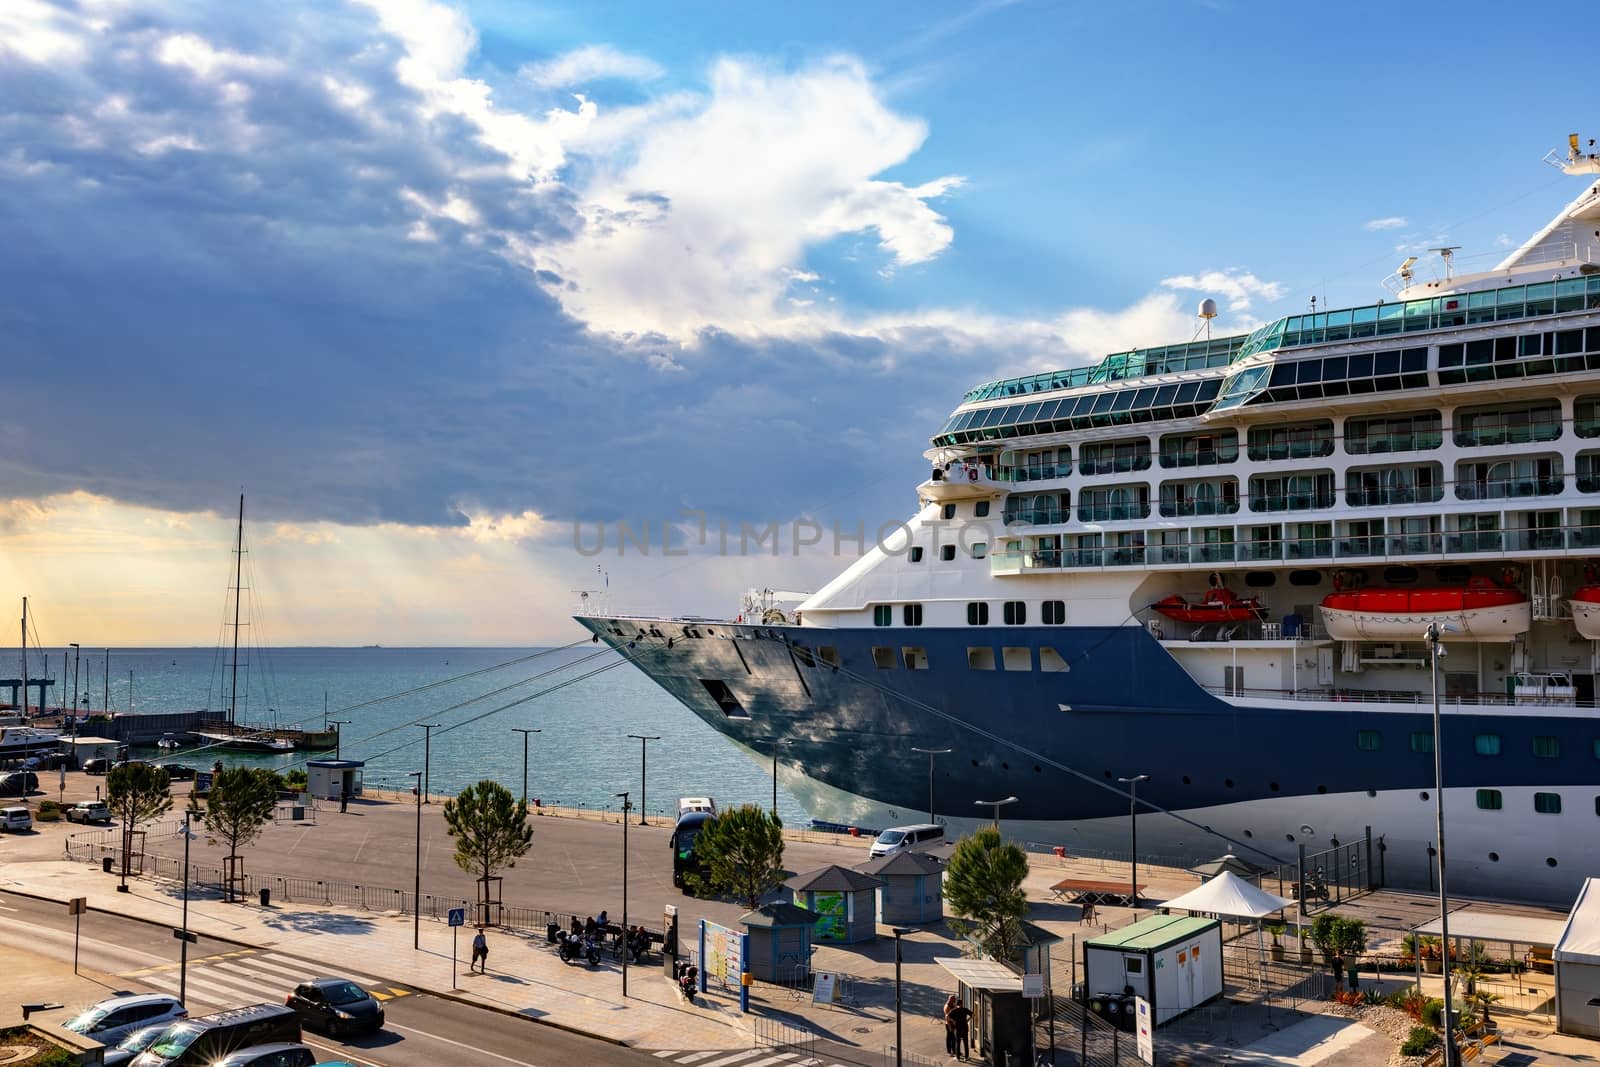 Large cruise ship anchored at the port by svedoliver